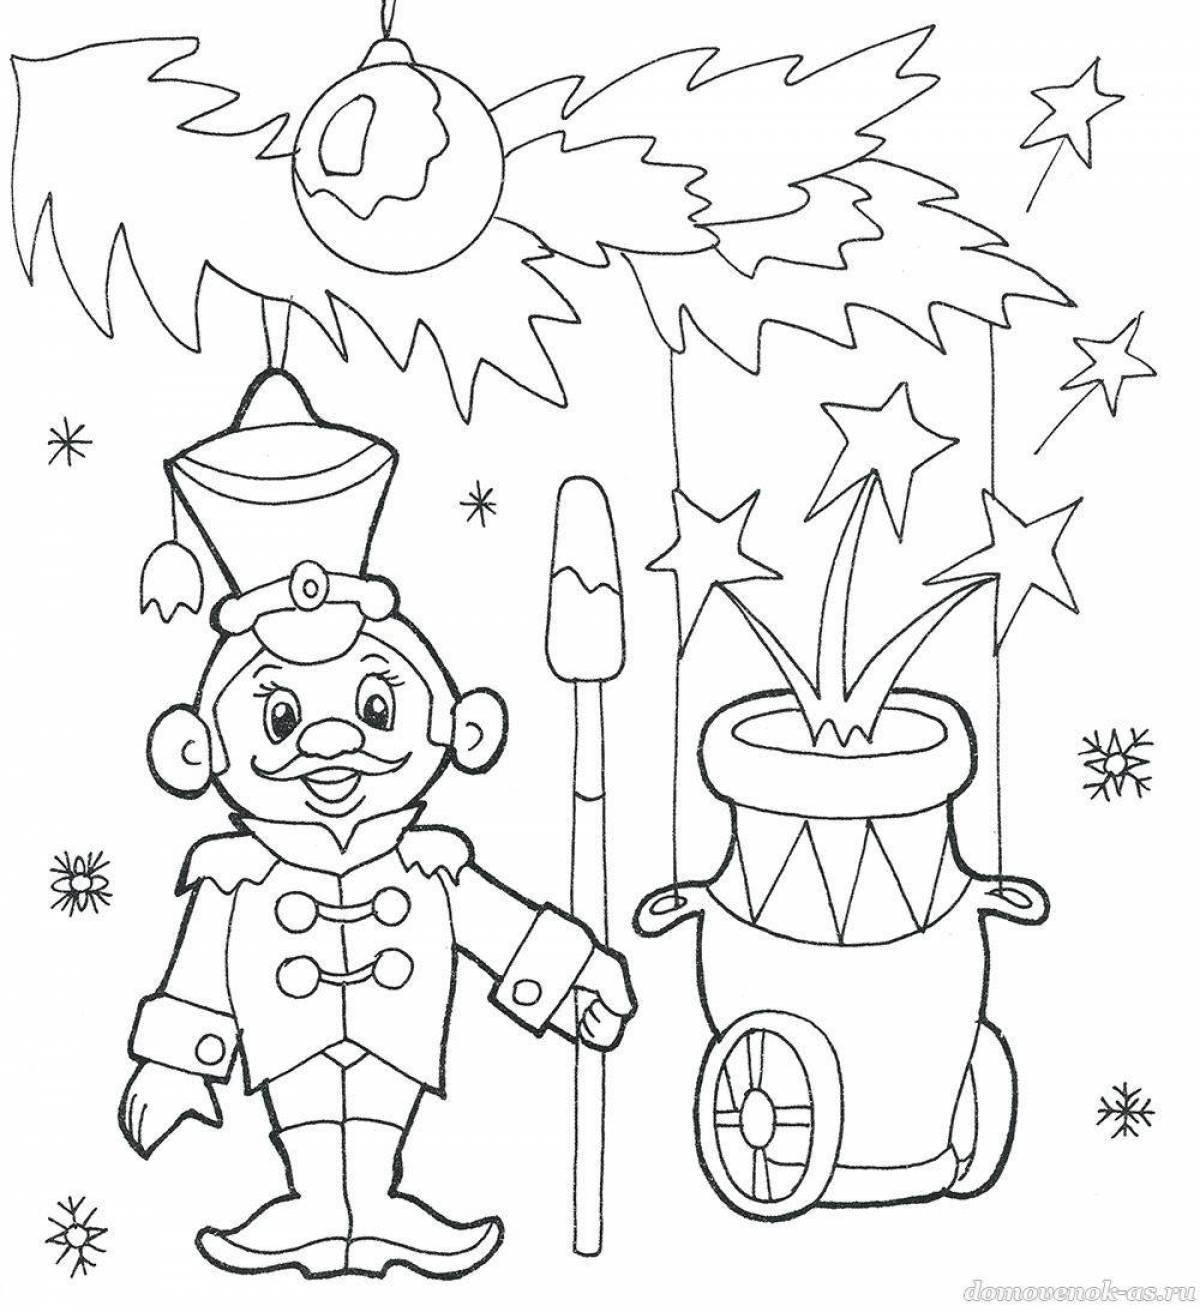 Energetic Christmas coloring book for 6-7 year olds